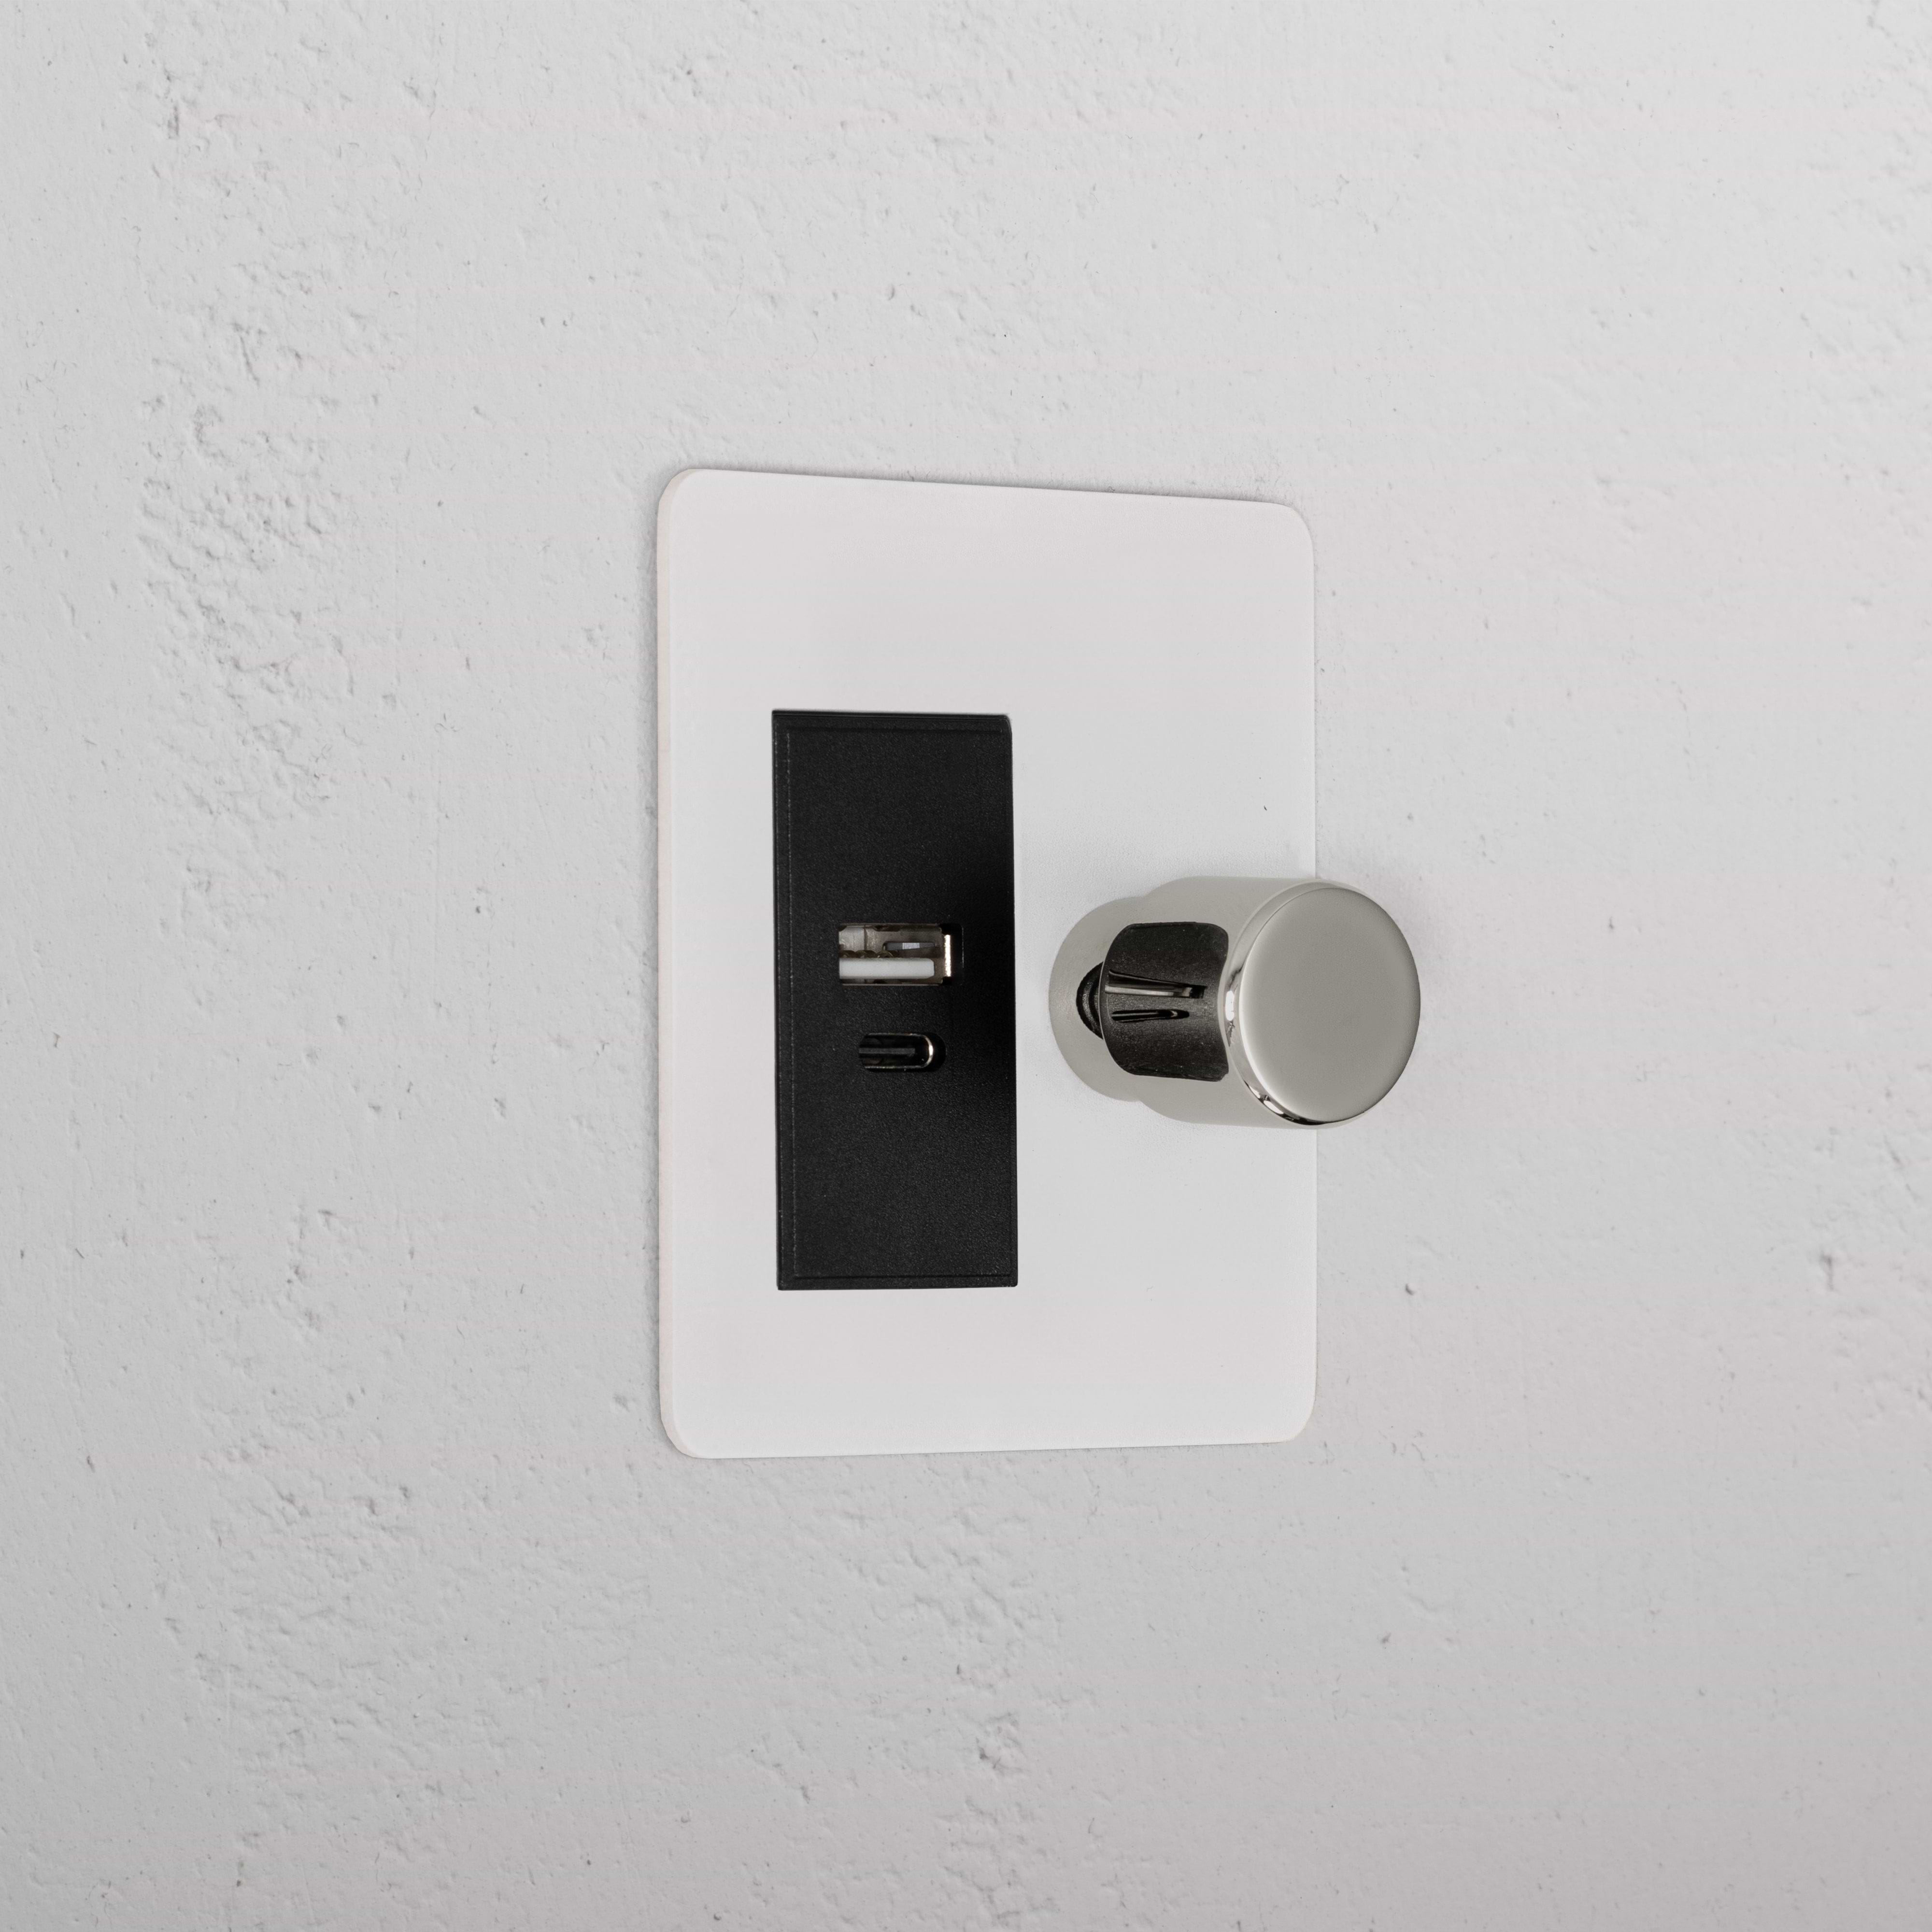 1G Two Way Dimmer + USB A+C Slimline Switch - Paintable Polished Nickel Black